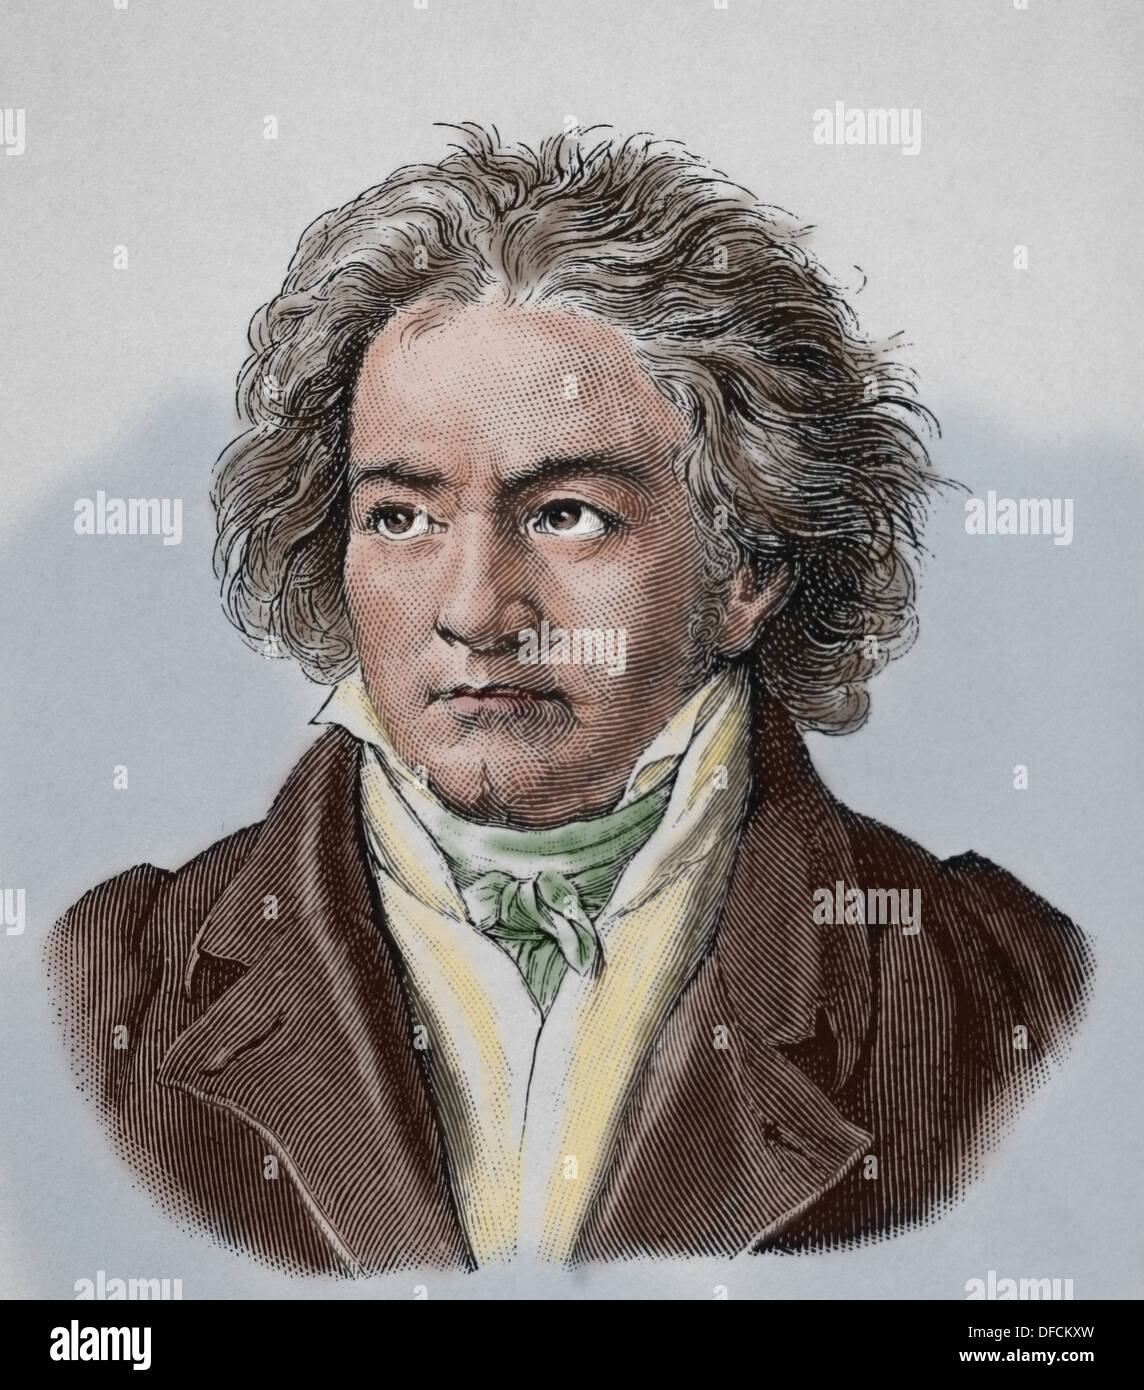 Ludwig van Beethoven (1770-1827). German composer and pianist. Portrait. Colored engraving. Stock Photo